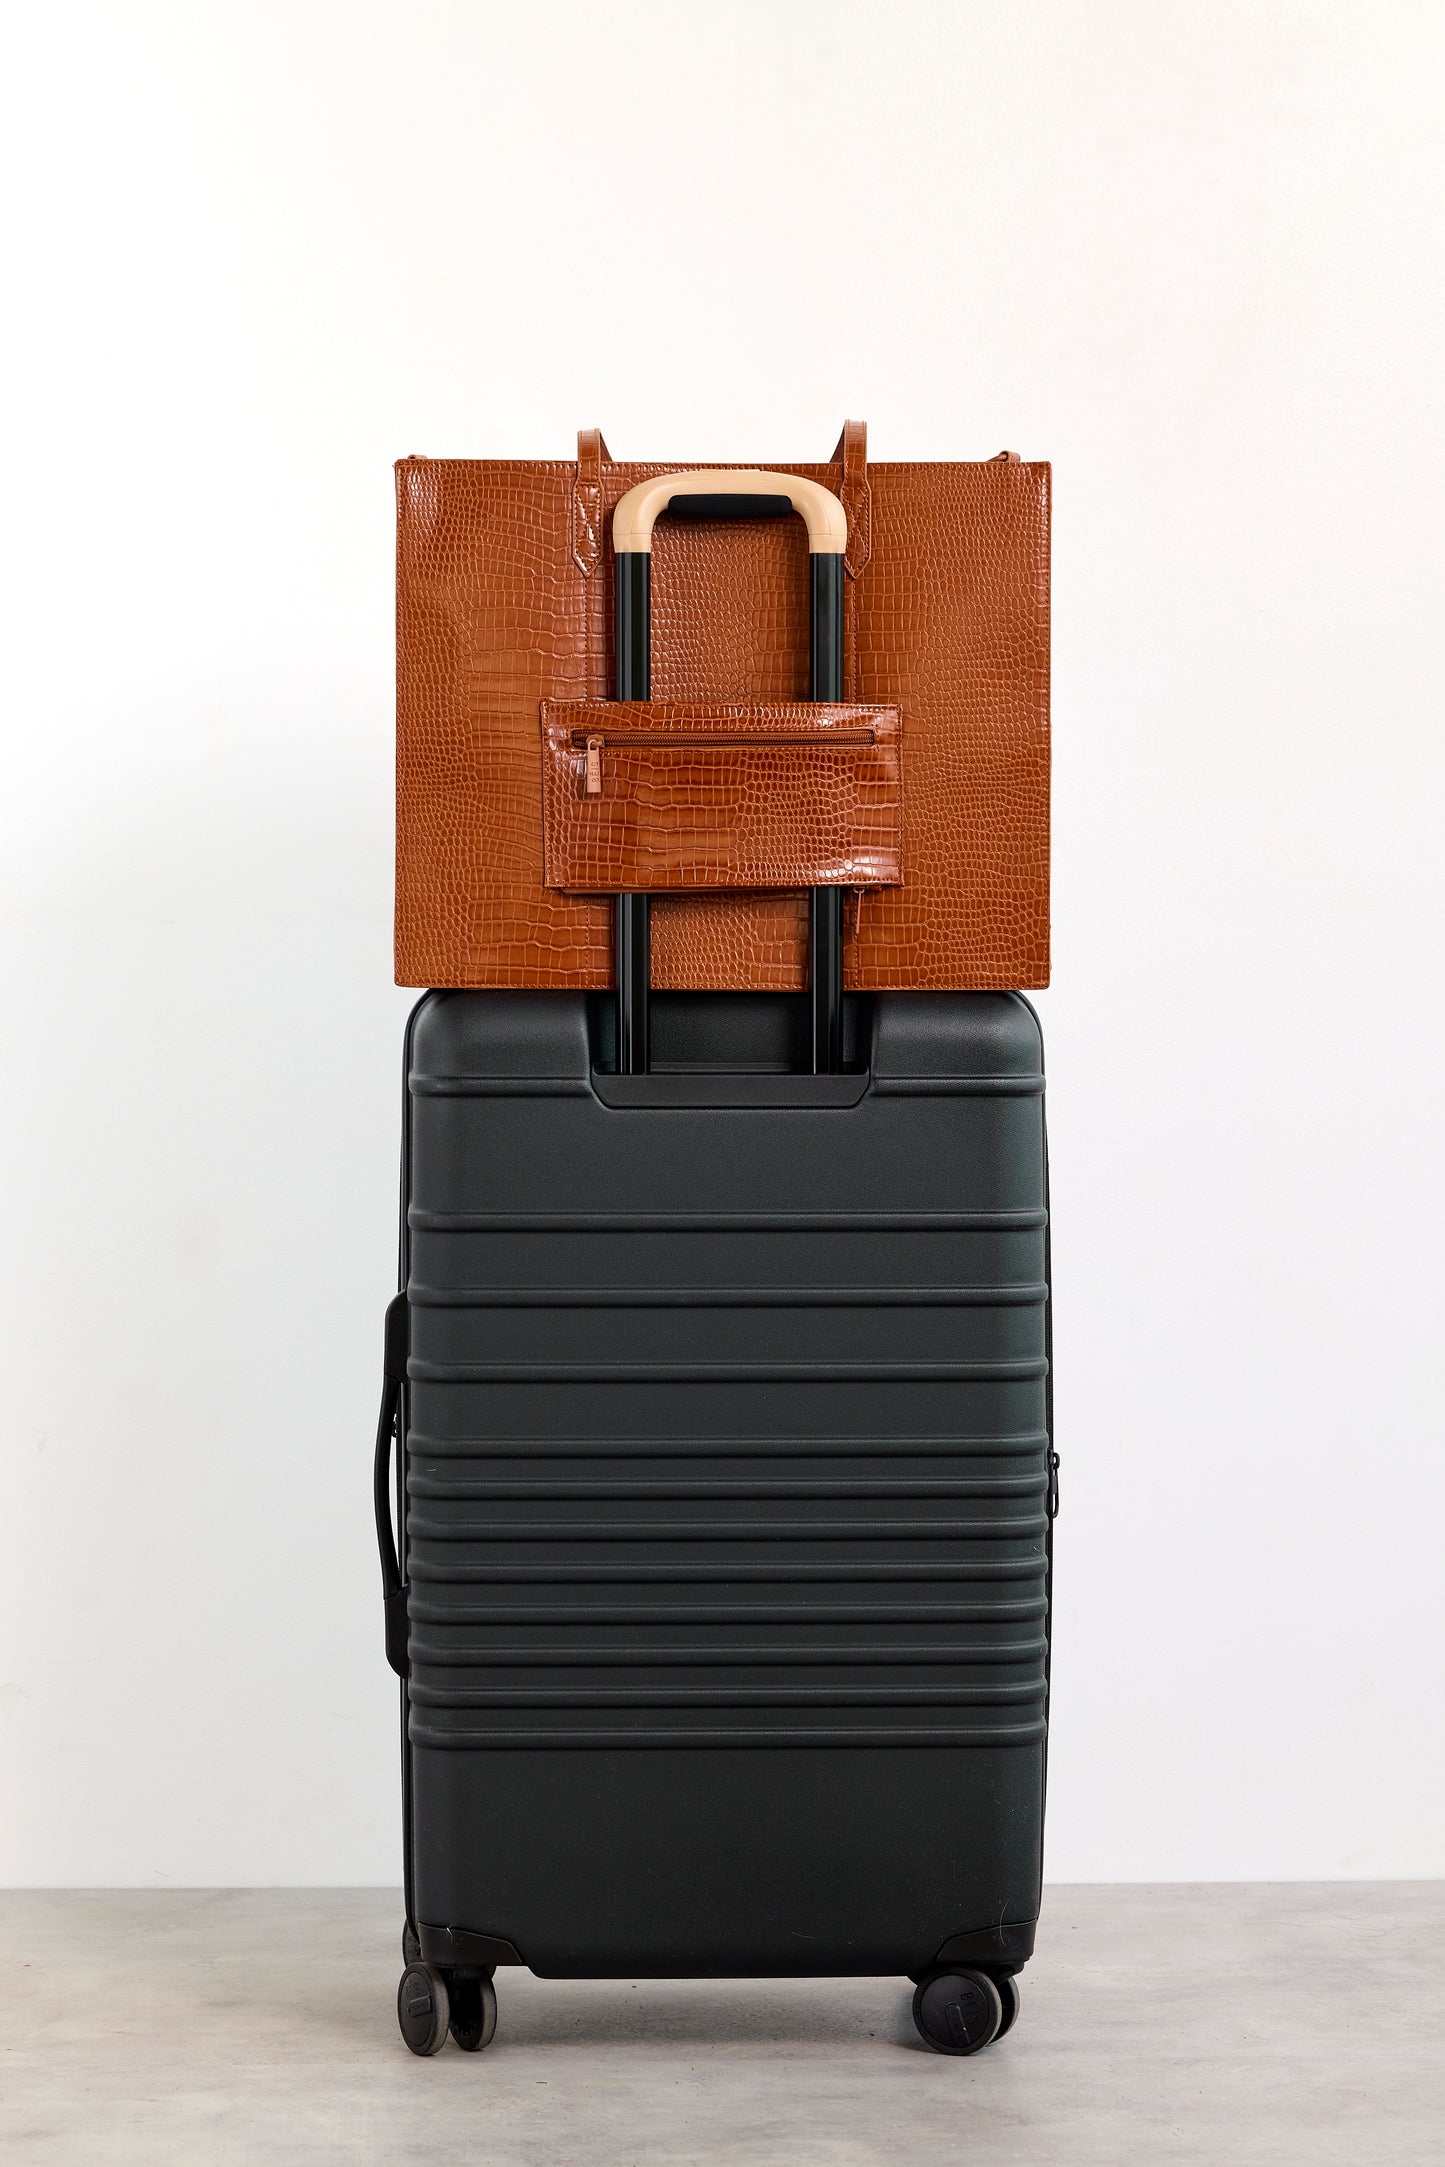 The Large Work Tote in Cognac Croc